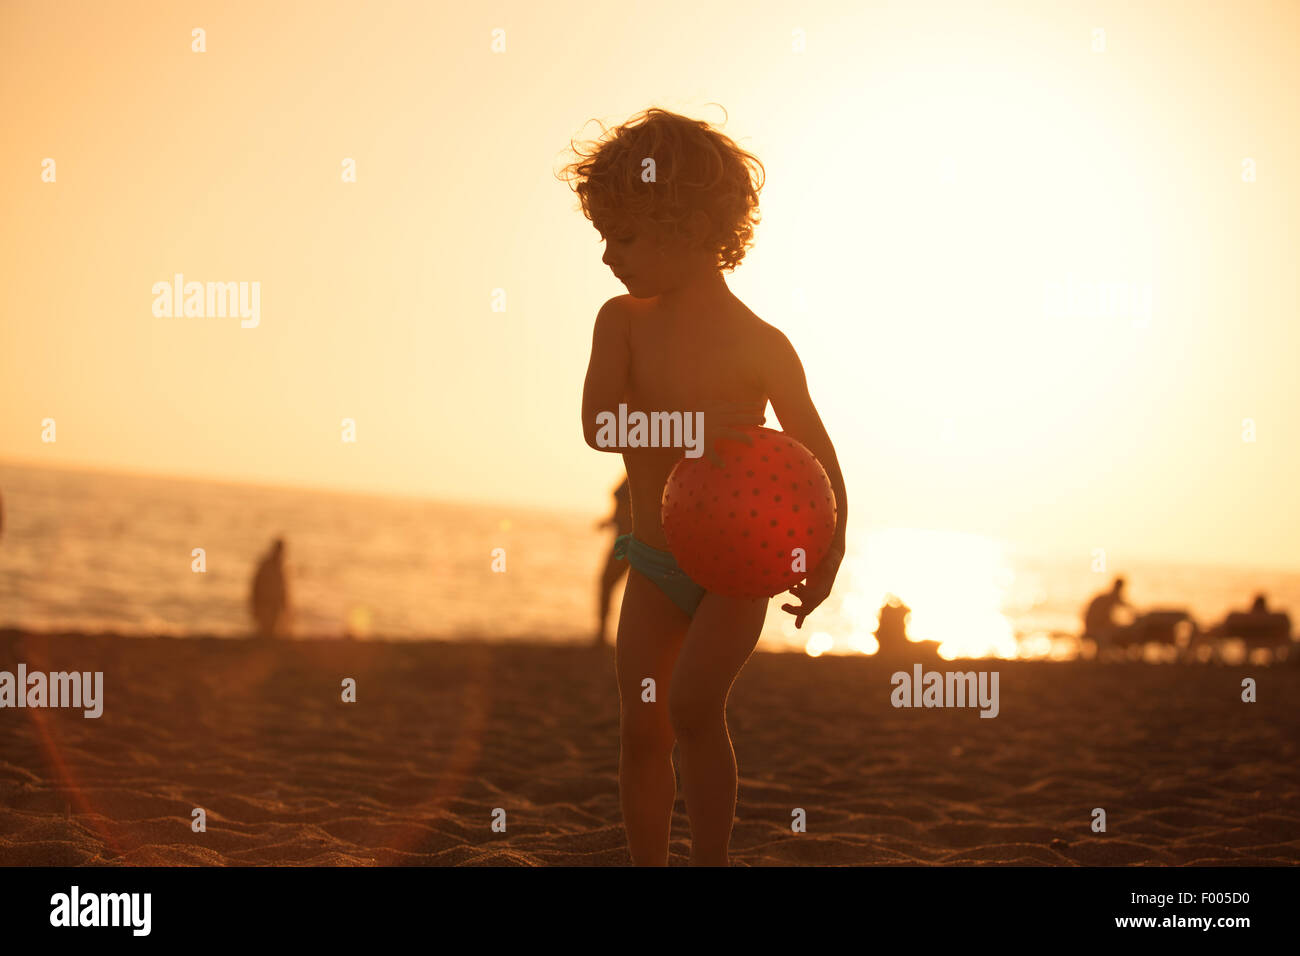 Summer vacation - little girl playing on sandy beach at sunset Stock Photo